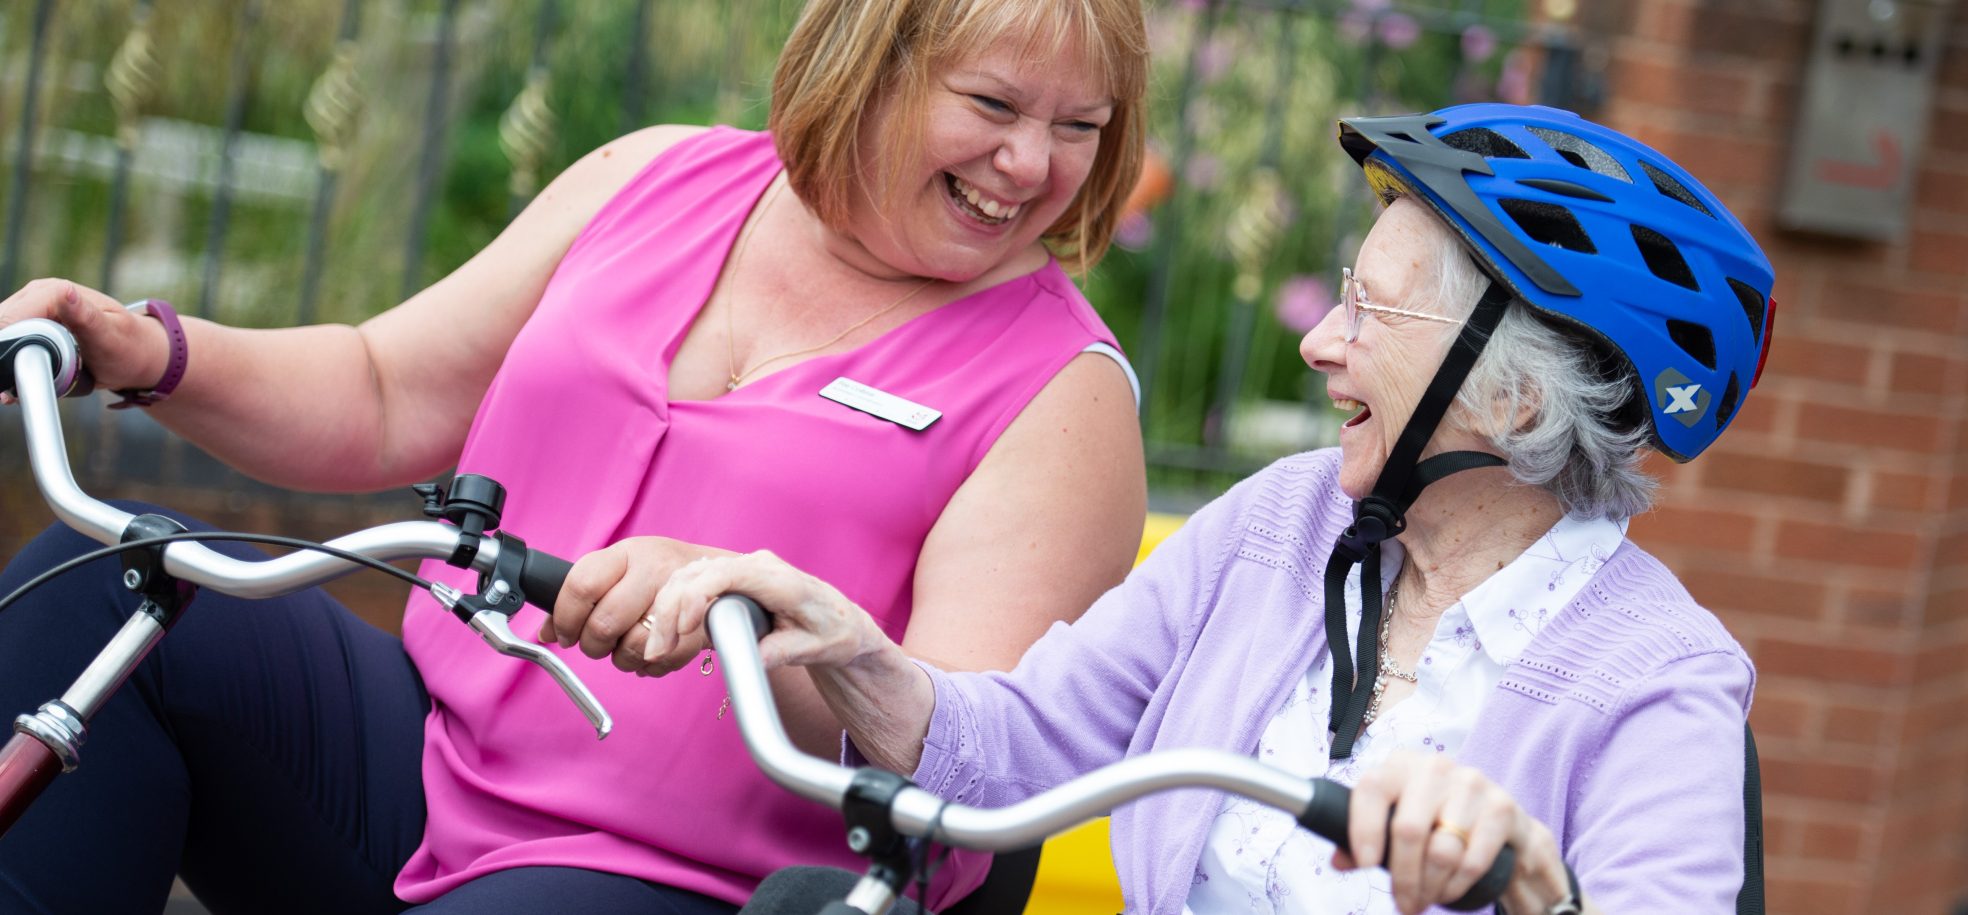 Staff member and resident riding a bike together at Devonshire Court, Leicester.